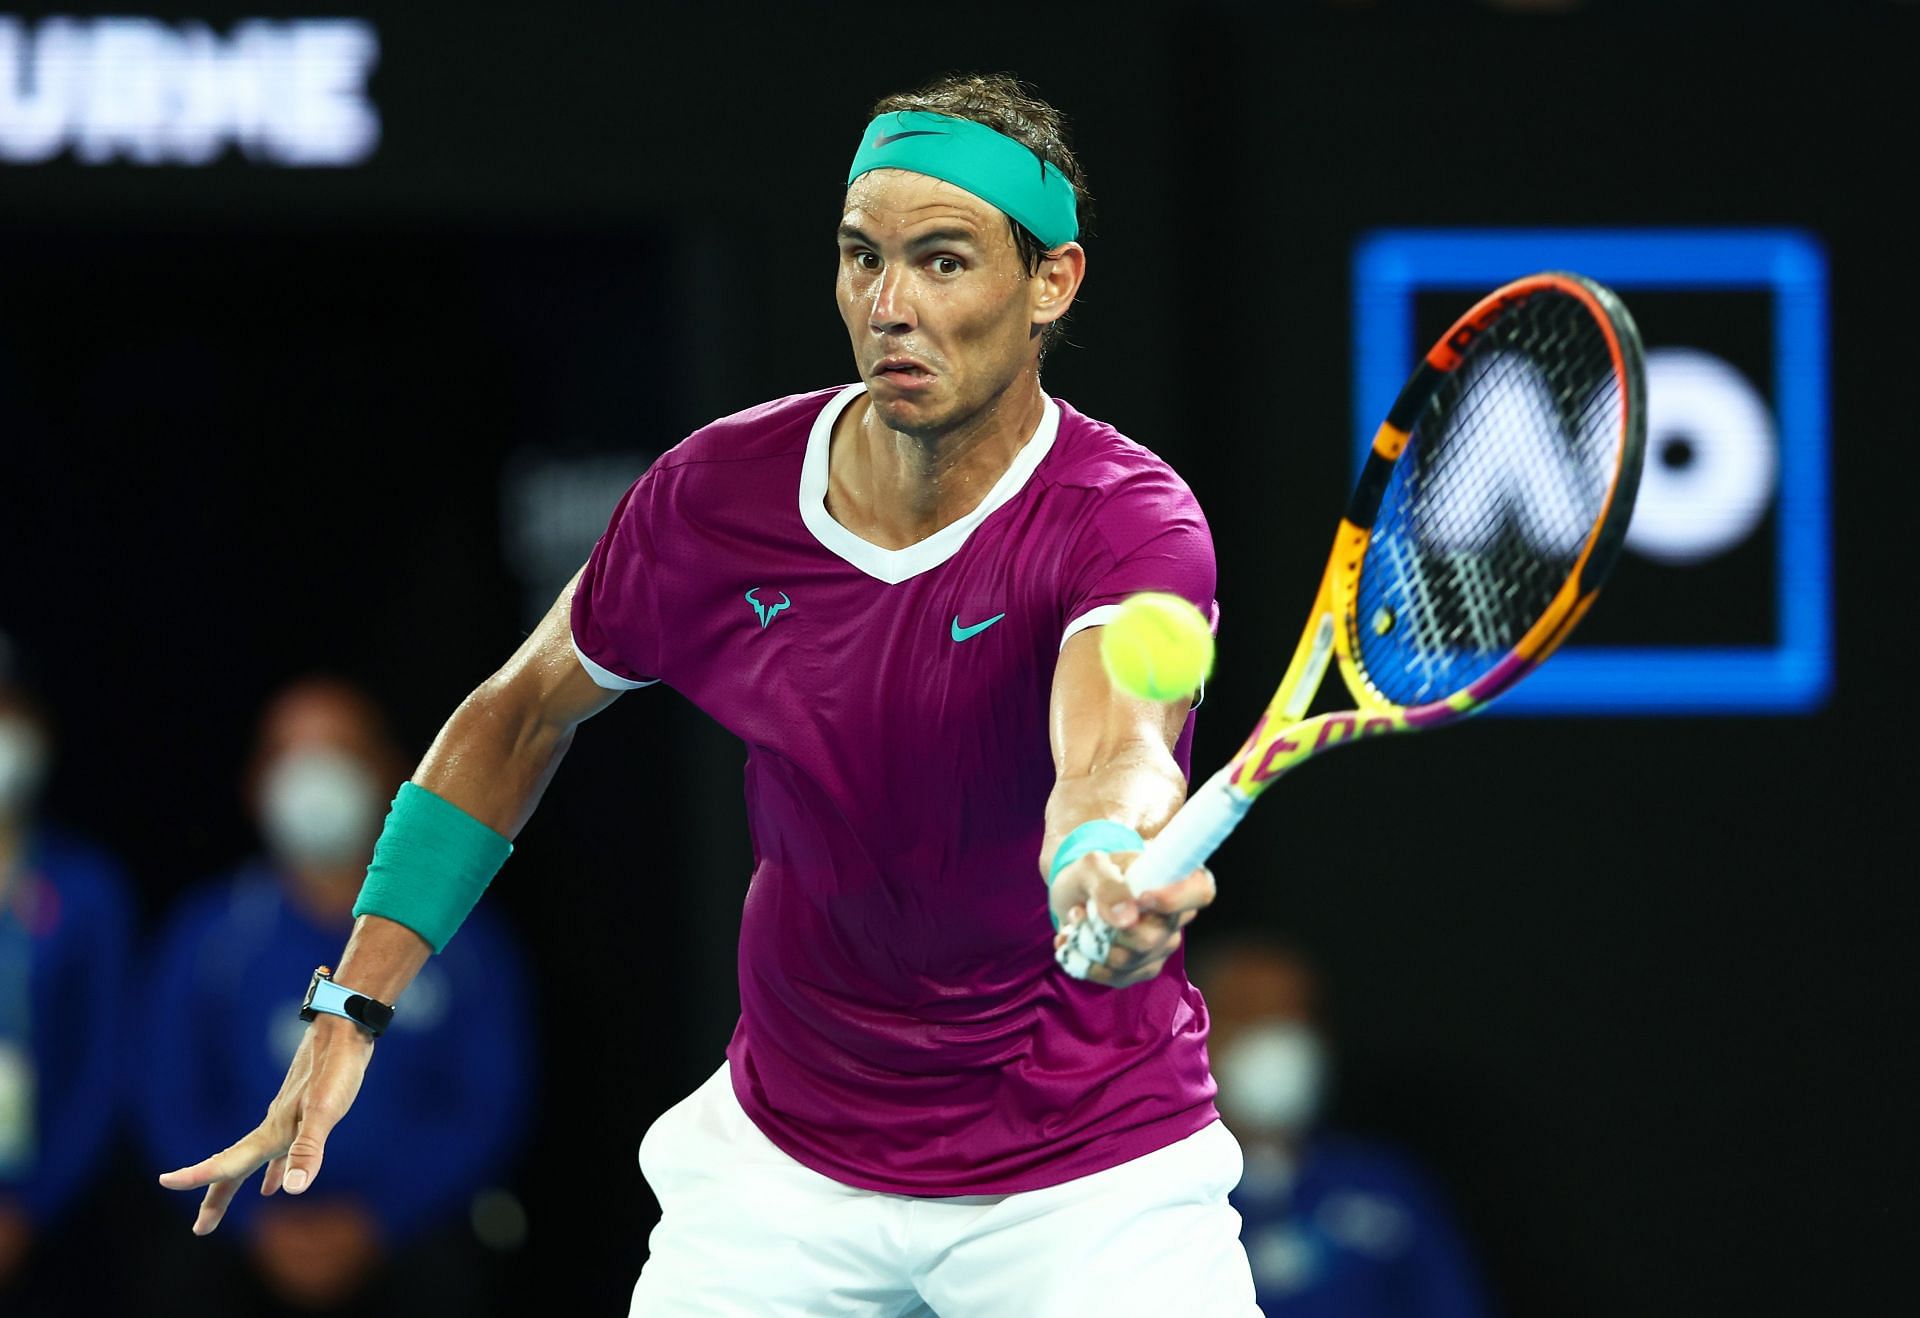 Rafael Nadal in action at the 2022 Australian Open